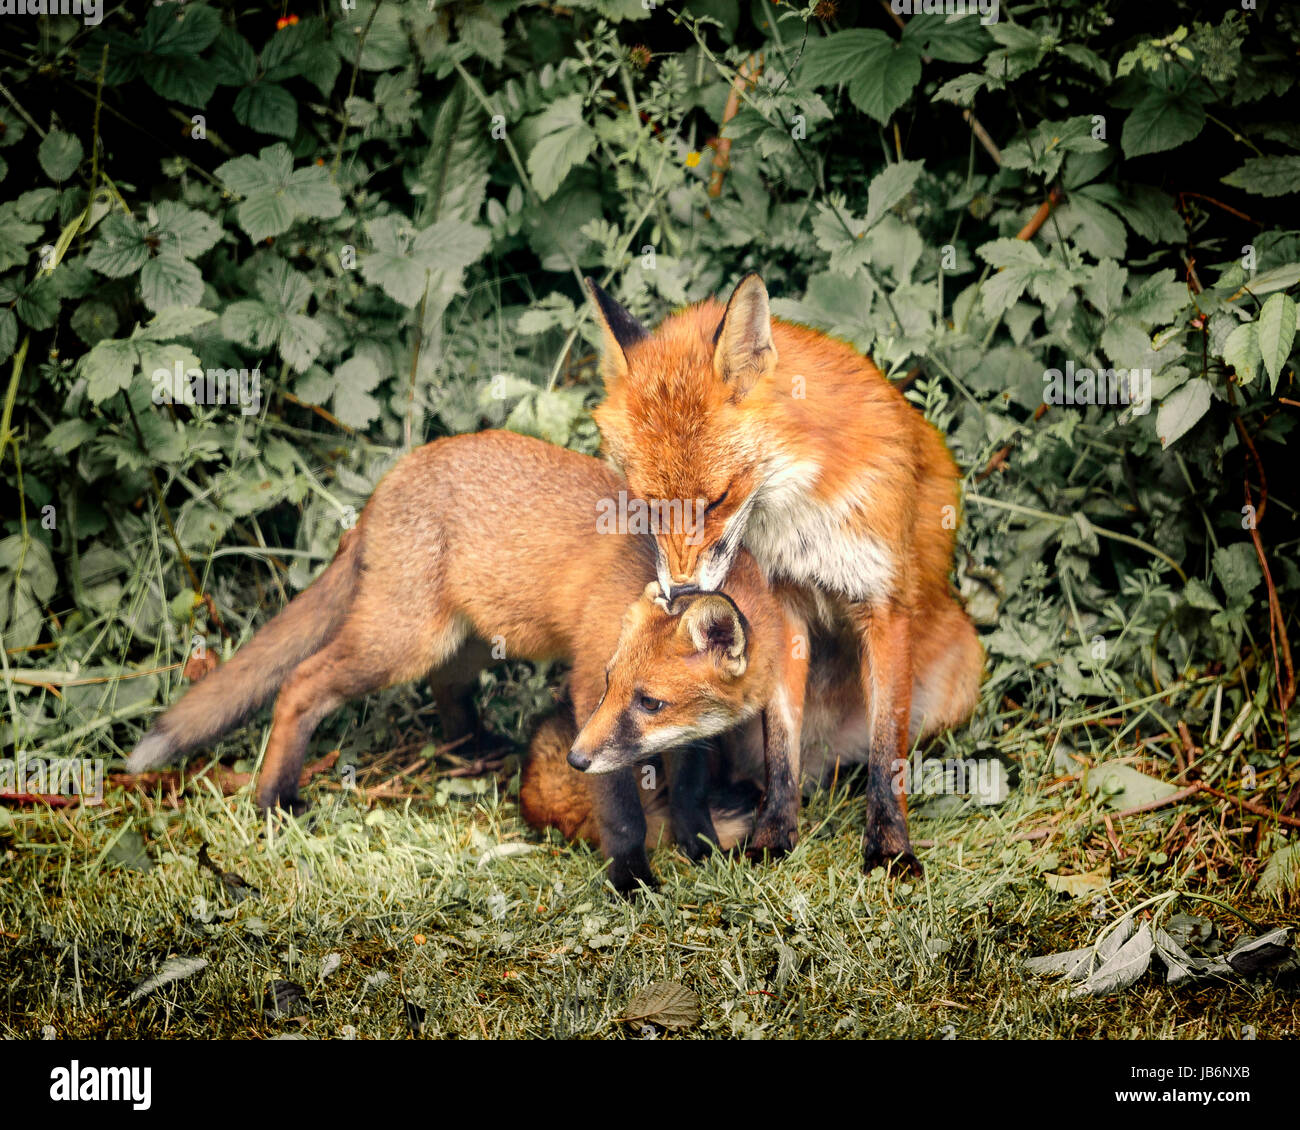 Urban Fox with cub, Leeds, West Yorkshire, UK. 9th Jun, 2017. Urban. Foxes in a suburban Leeds garden. Residents Lynne and Ian Wray awoke to the beautiful sight of a vixen preening her cub in the morning sunshine. Suddenly alerted by a noise, the cub darted into the undergrowth, whilst the mother prowled off to investigate, disappearing into the hedge further along the garden. Copyright Credit: Ian Wray/Alamy Live News Stock Photo